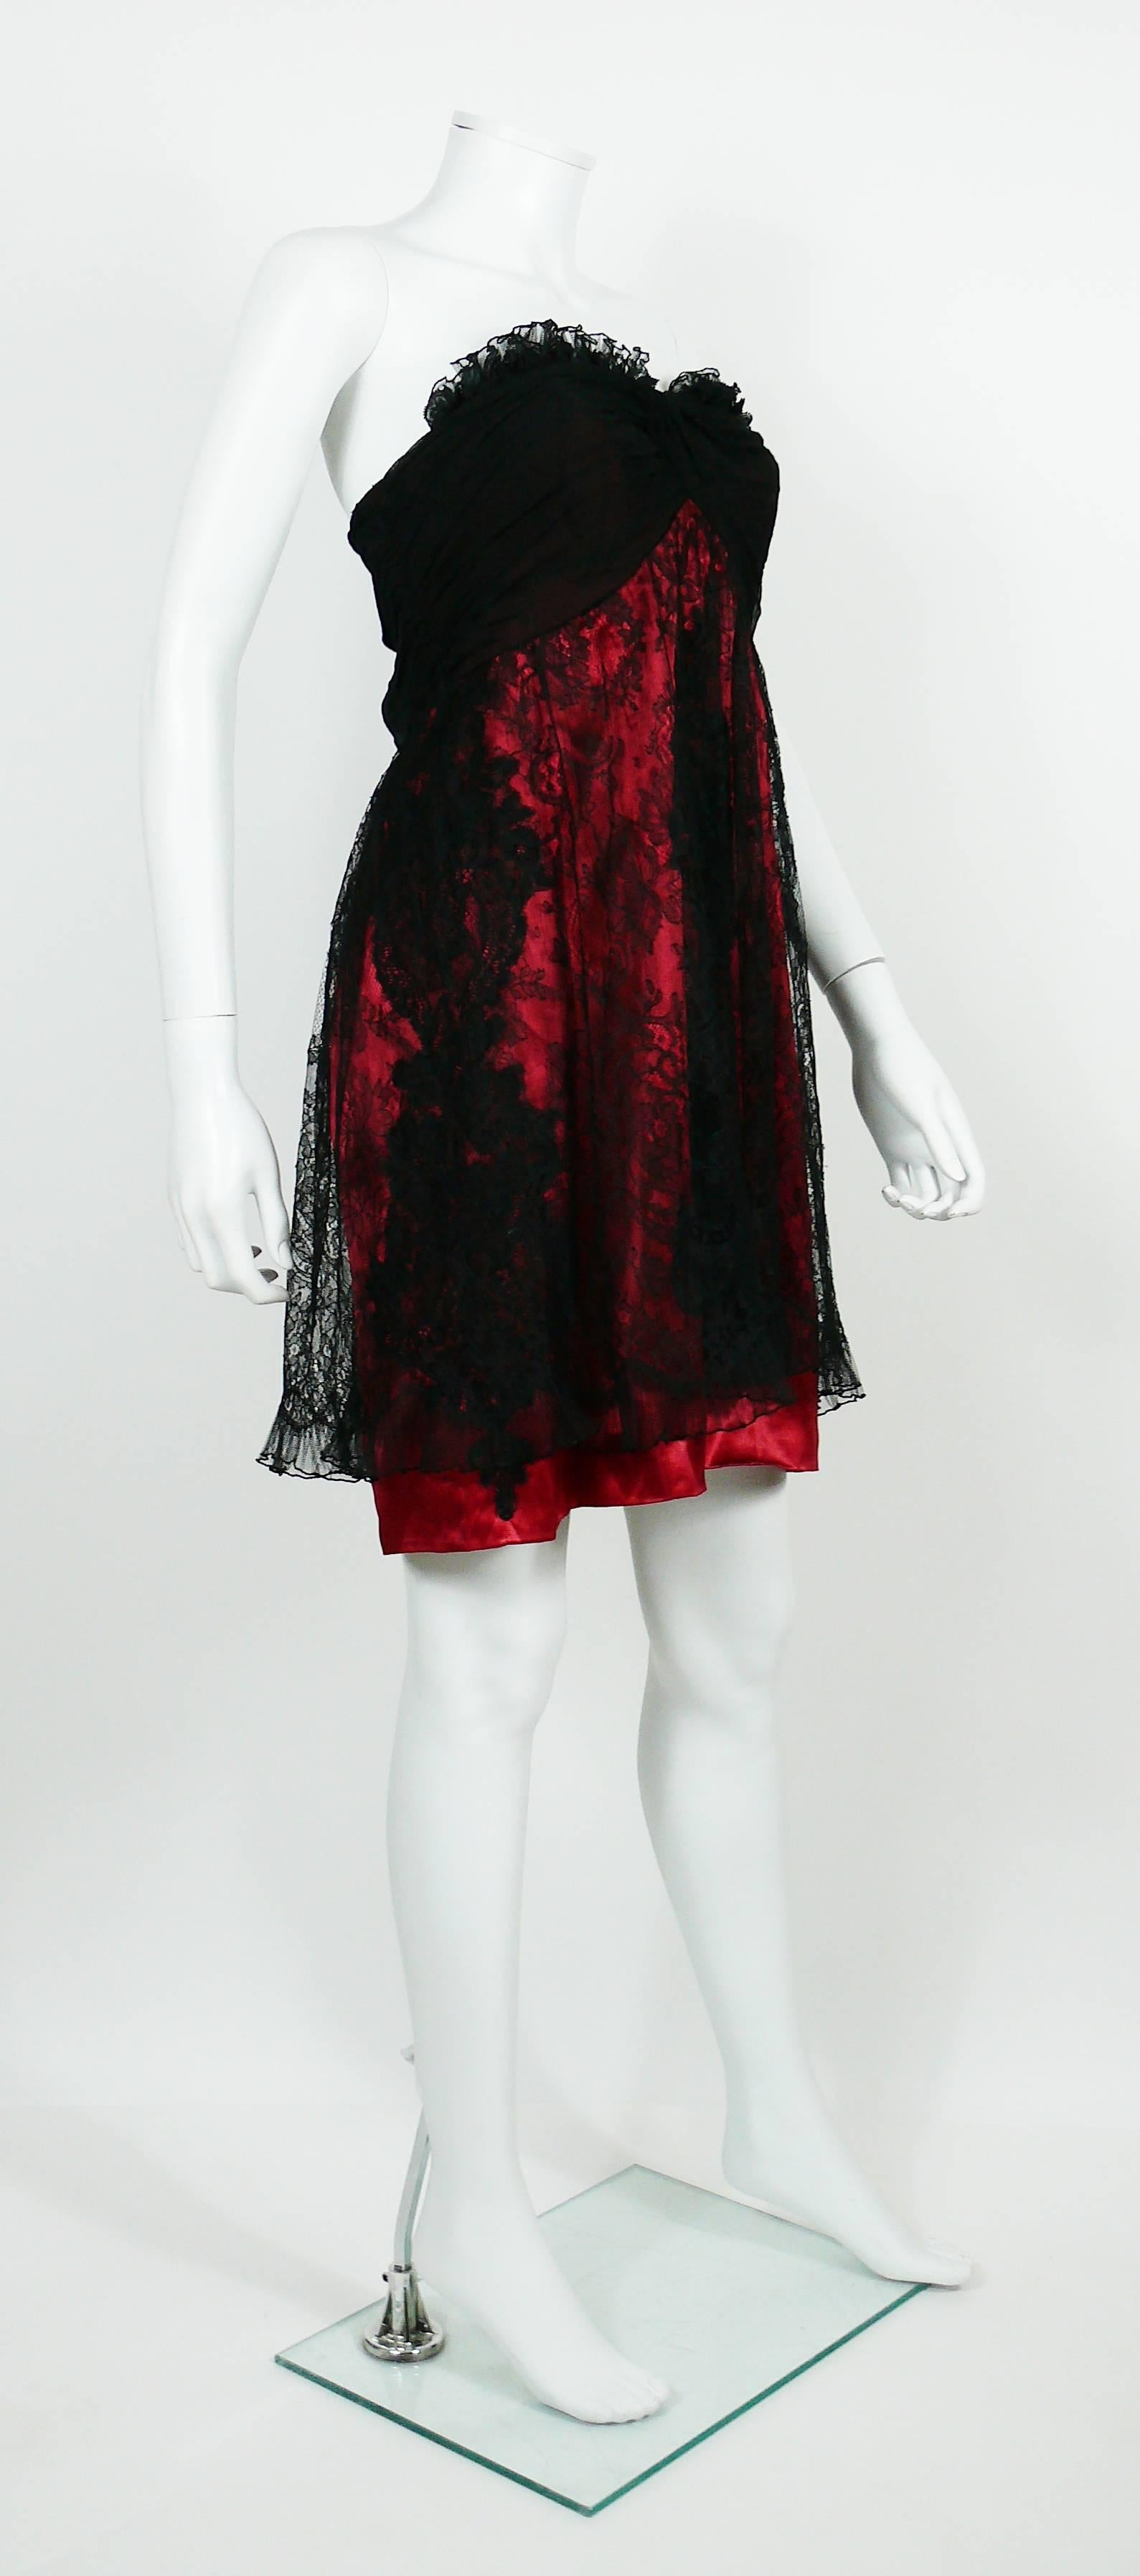 CHRISTIAN LACROIX vintage 1990s red and black lace strapless cocktail dress.

Label reads CHRISTIAN LACROIX PARIS.
Made in France.

Size tag reads : 40.
Please refer to measurements.

Composition tag reads : 70 % Nylon / 30 % Rayon.

Indicative